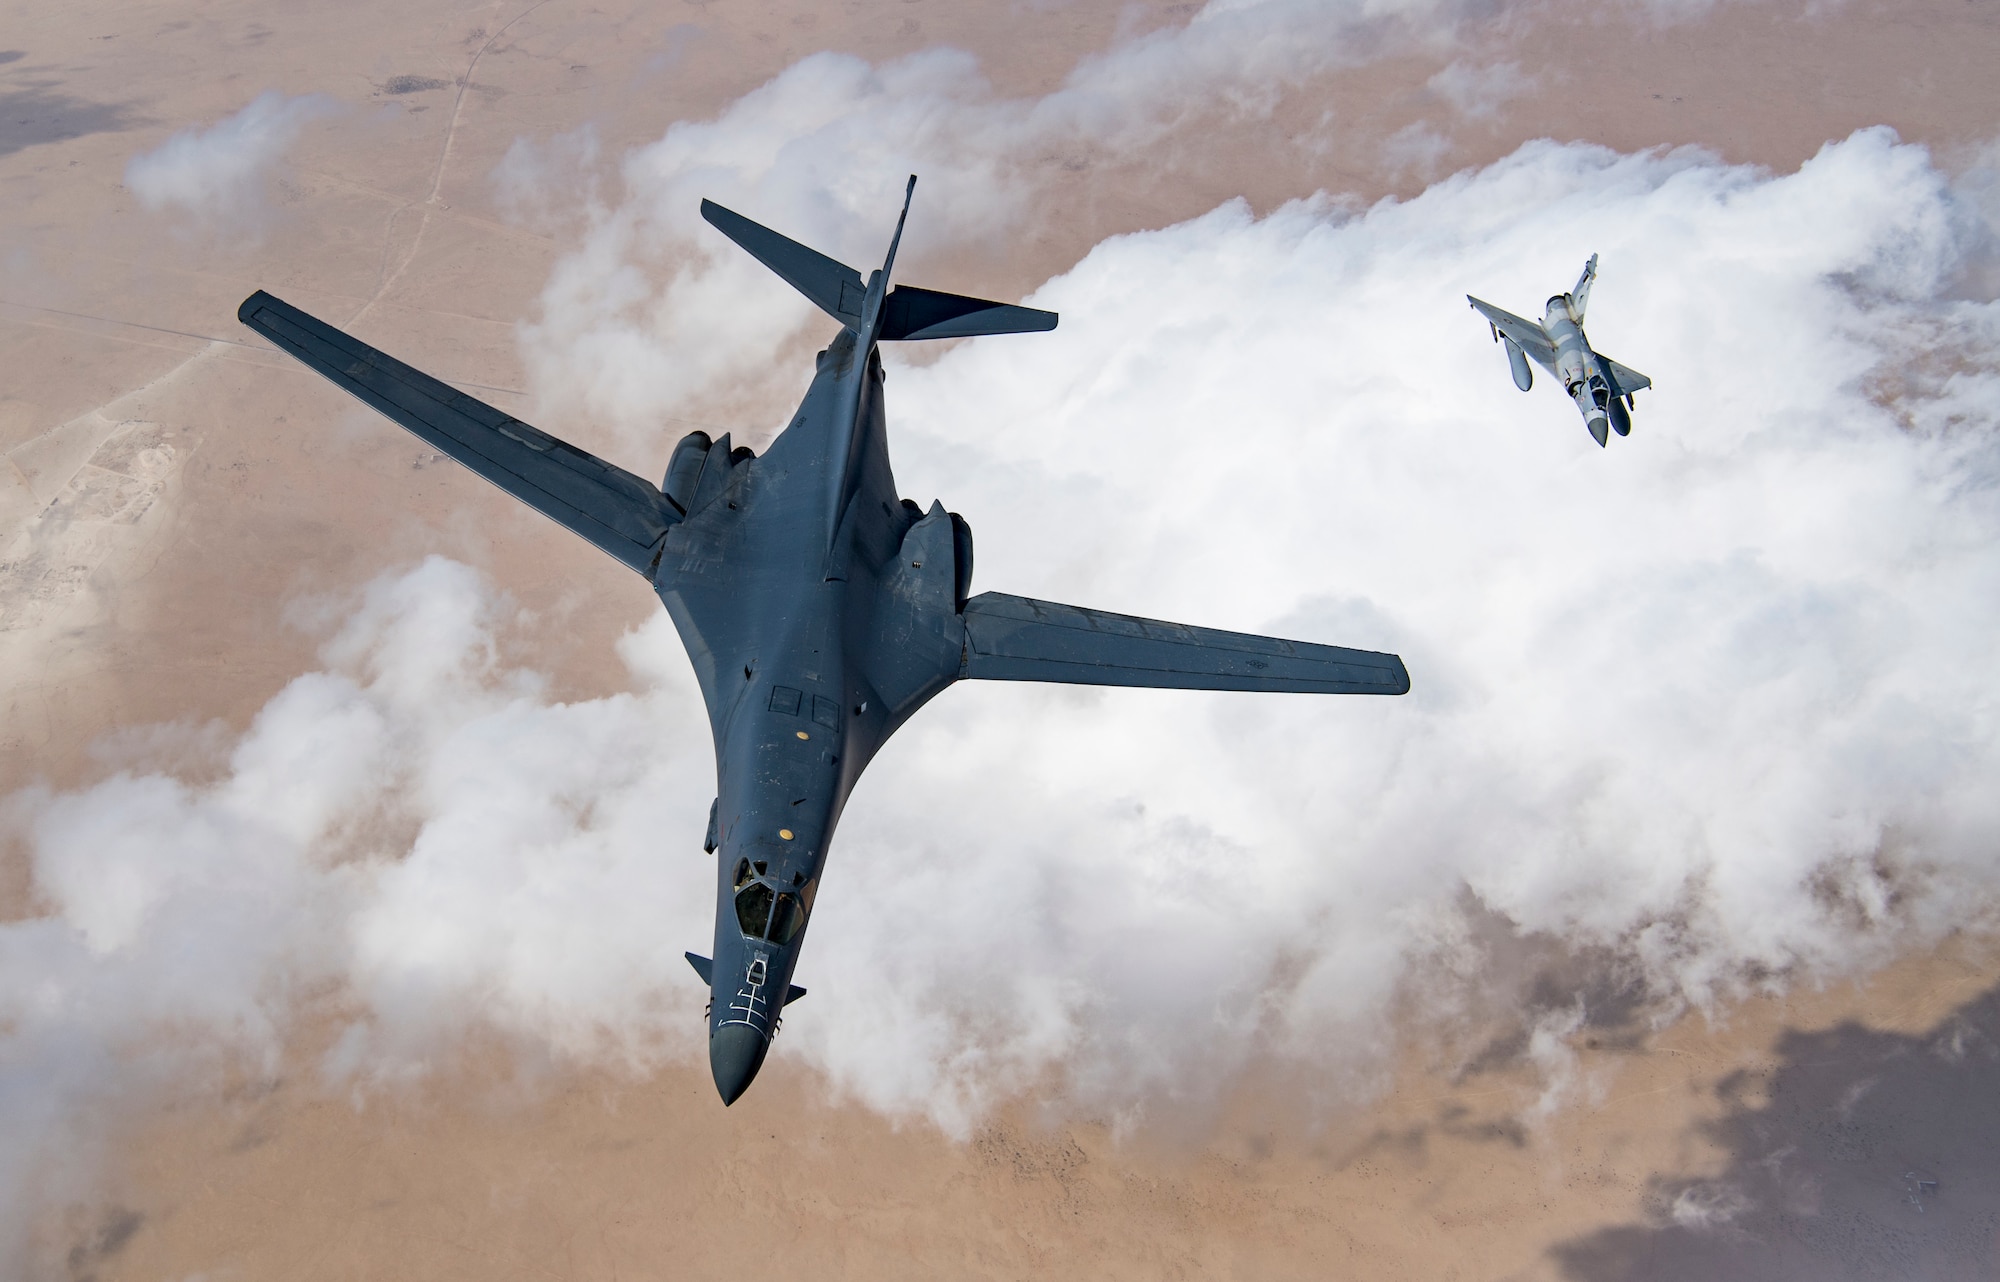 A U.S. Air Force B-1B Lancer bomber and a Qatari Mirage 2000 fly in formation during Joint Air Defense Exercise 19-01, Feb. 19, 2019. The aircraft participated with regional partners to test objective-based command and control actions during the exercise. (U.S. Air Force photo by Staff Sgt. Clayton Cupit)